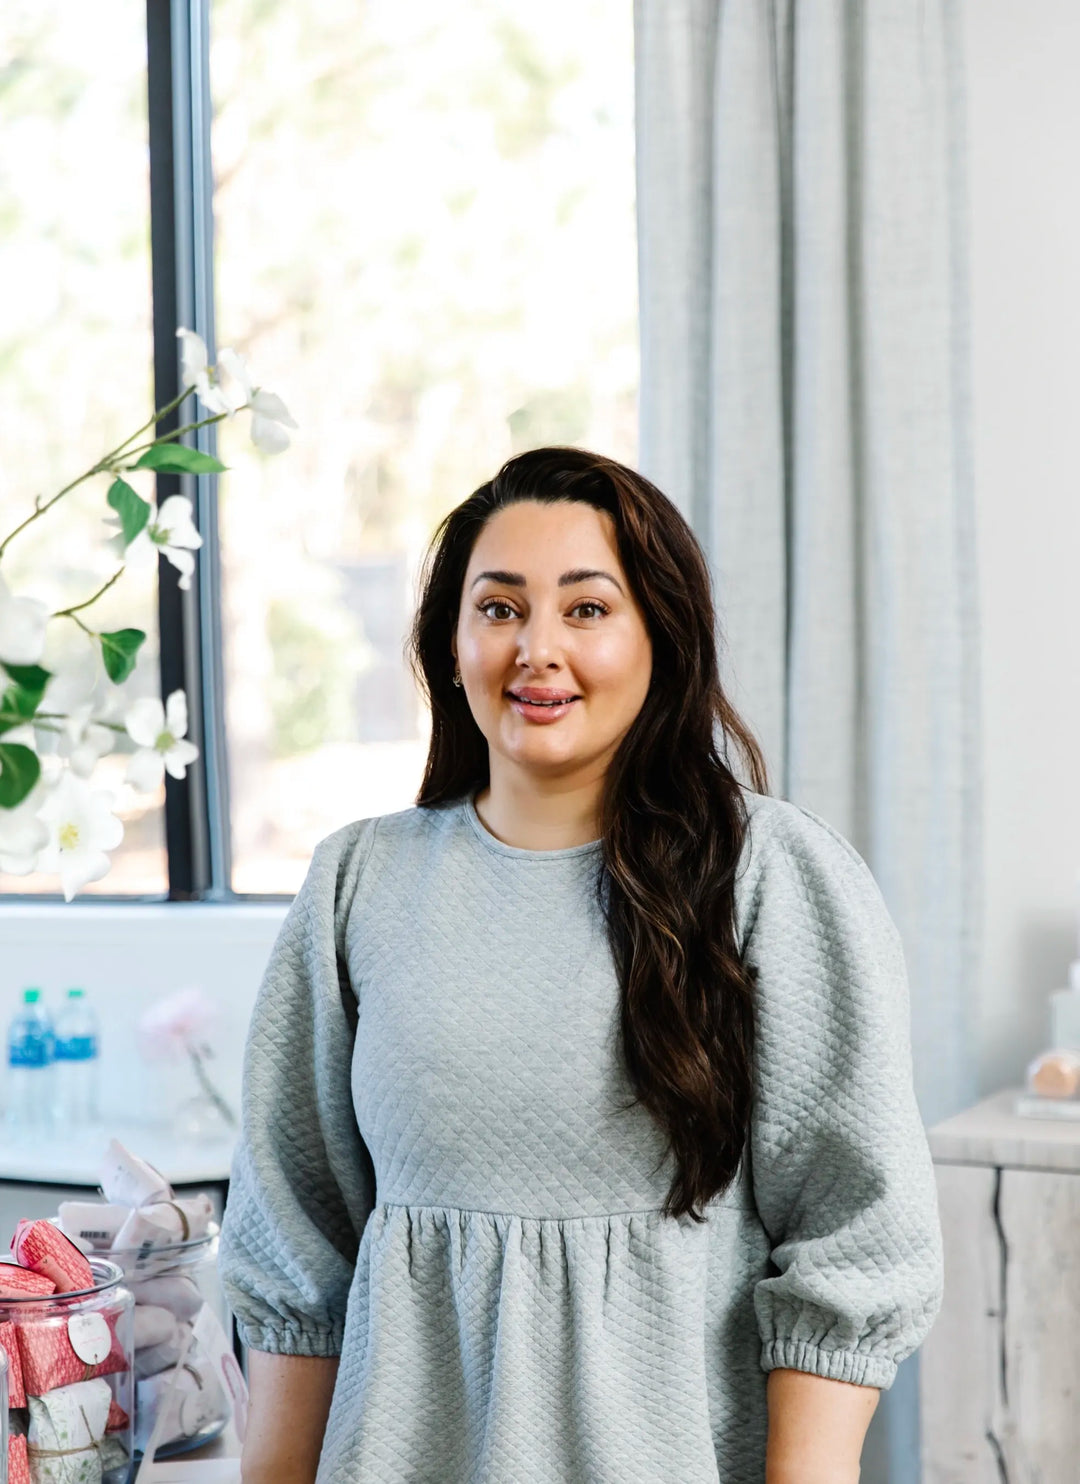 This is Sahar of Skin and Tonic Raleigh - Accountant